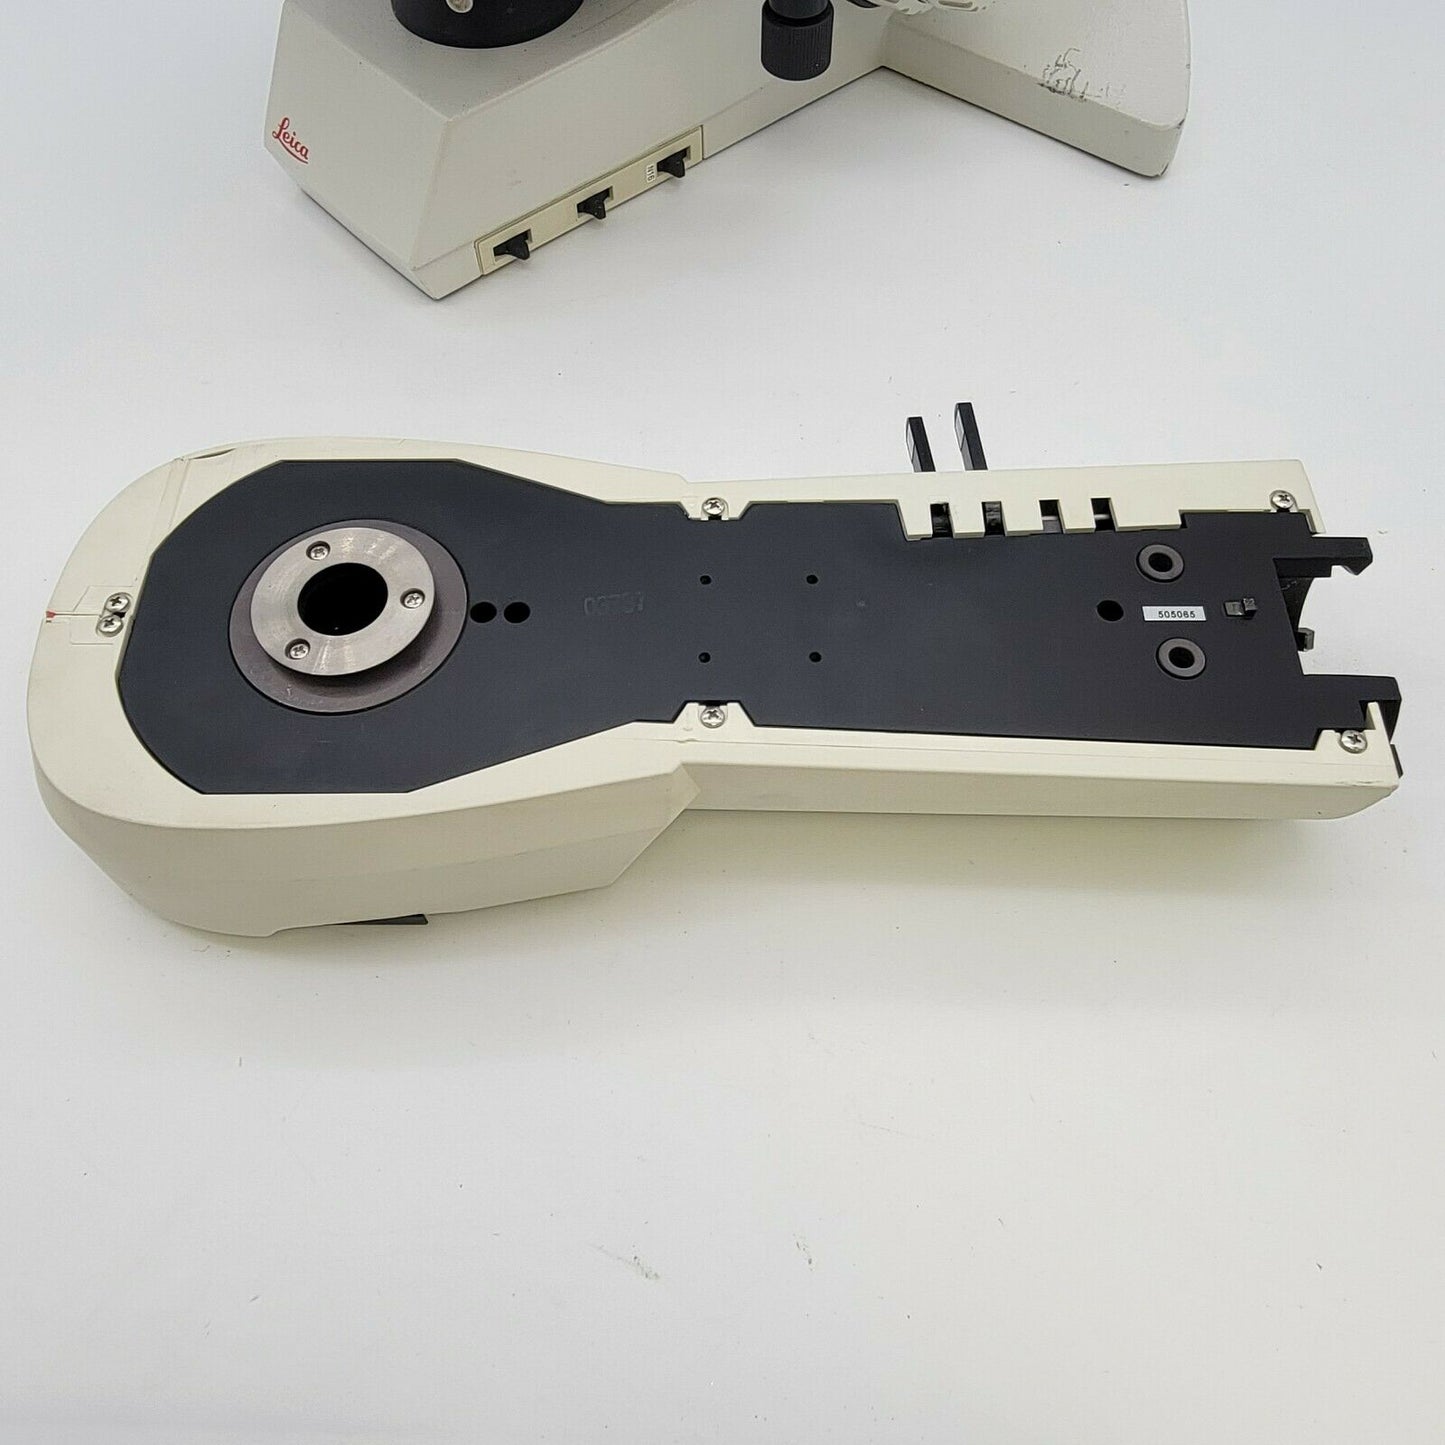 Leica Microscope DMLB Stand with Fluorescence 505065 and Stage for Parts - microscopemarketplace